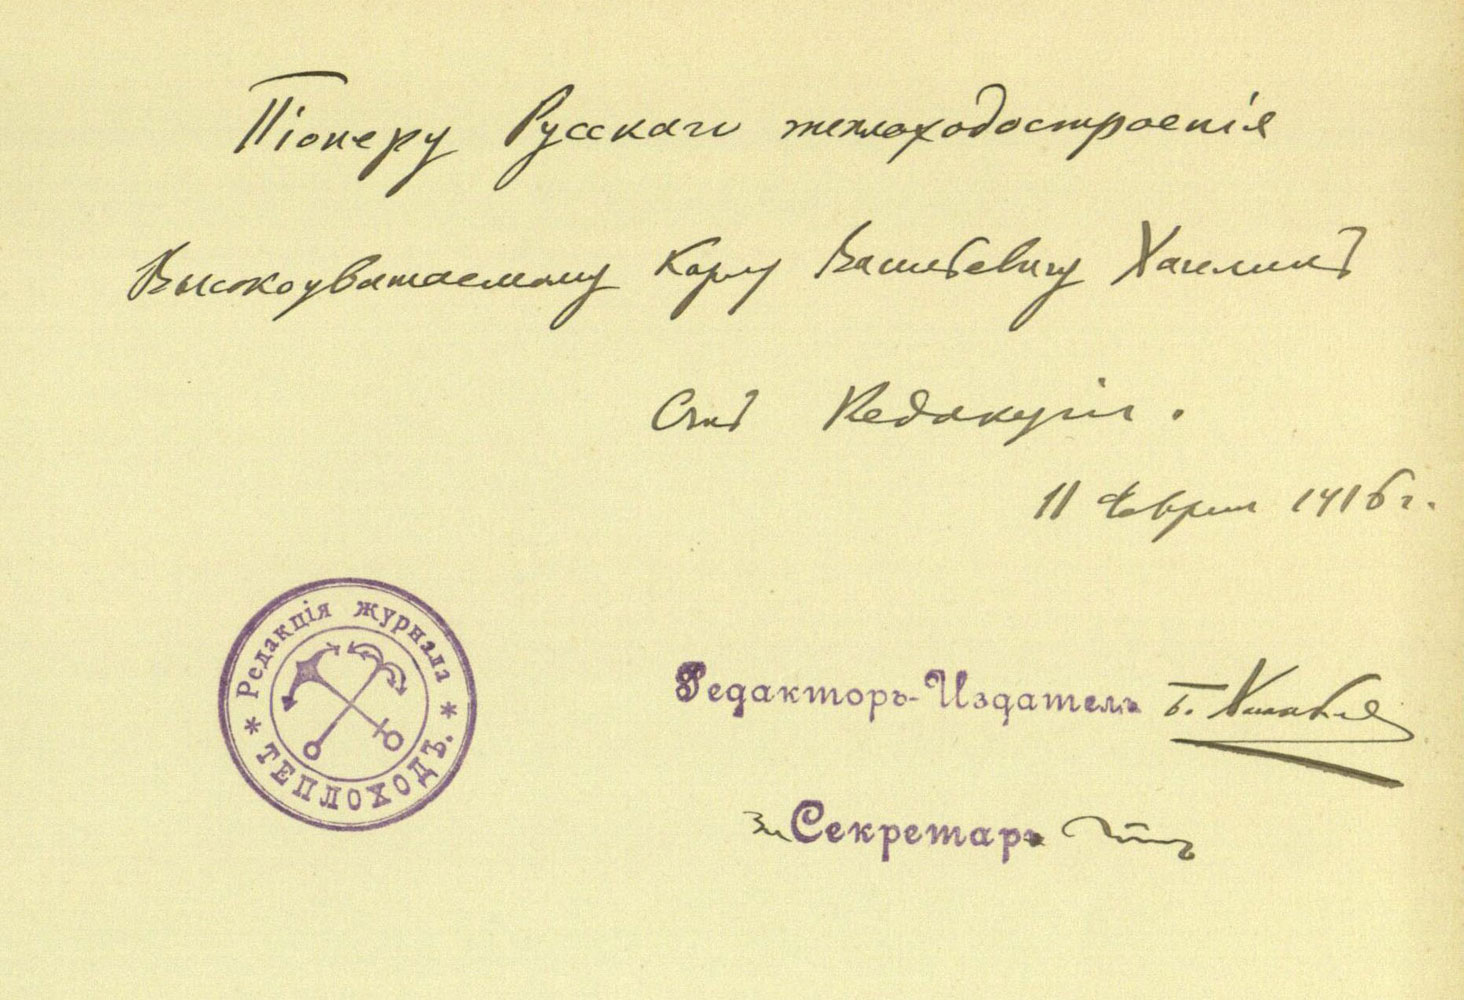 The illustrated magazine Motor Boat publisher Khanykov dedication to K.W. Hagelin, which reads: “To the pionair of the Russian motor boat building”. Hagelin had the main responsibility for Branobel’s transport fleet and managing the oil extraction and processing procedures in Baku.